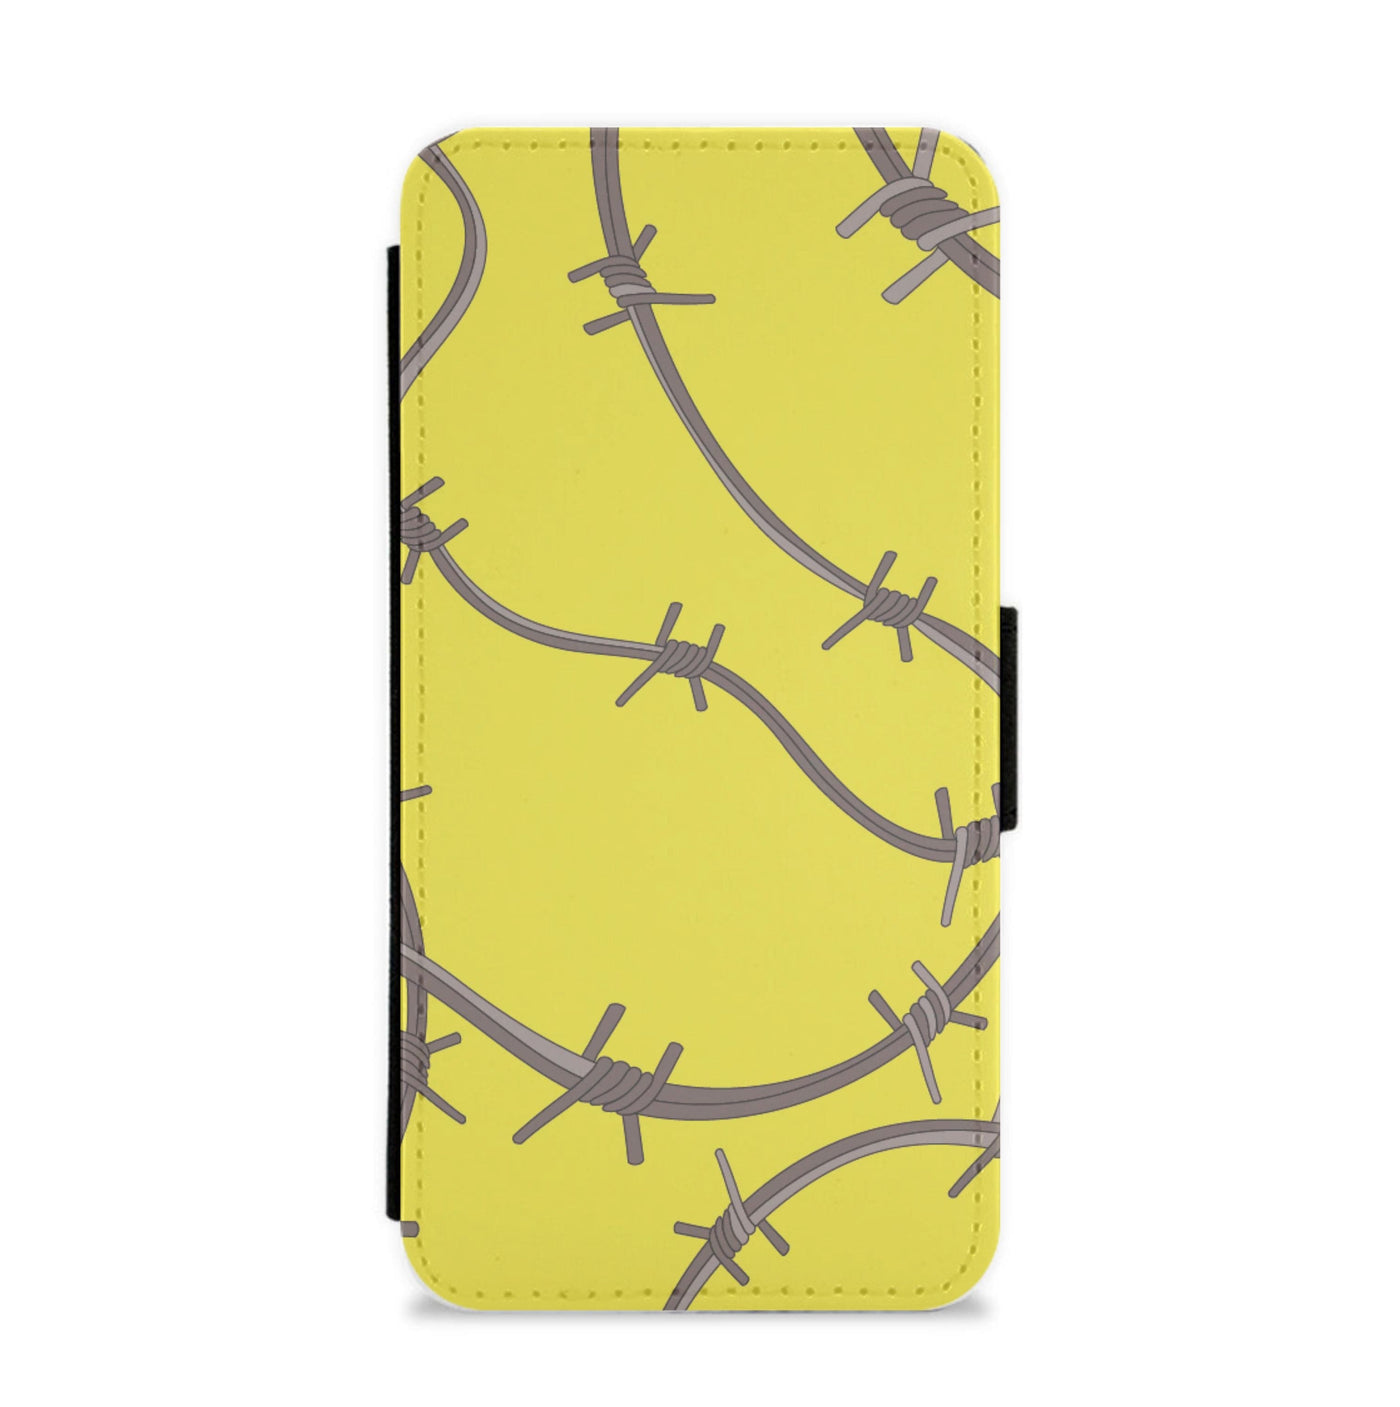 Barbed Wire - Post Malone Flip / Wallet Phone Case